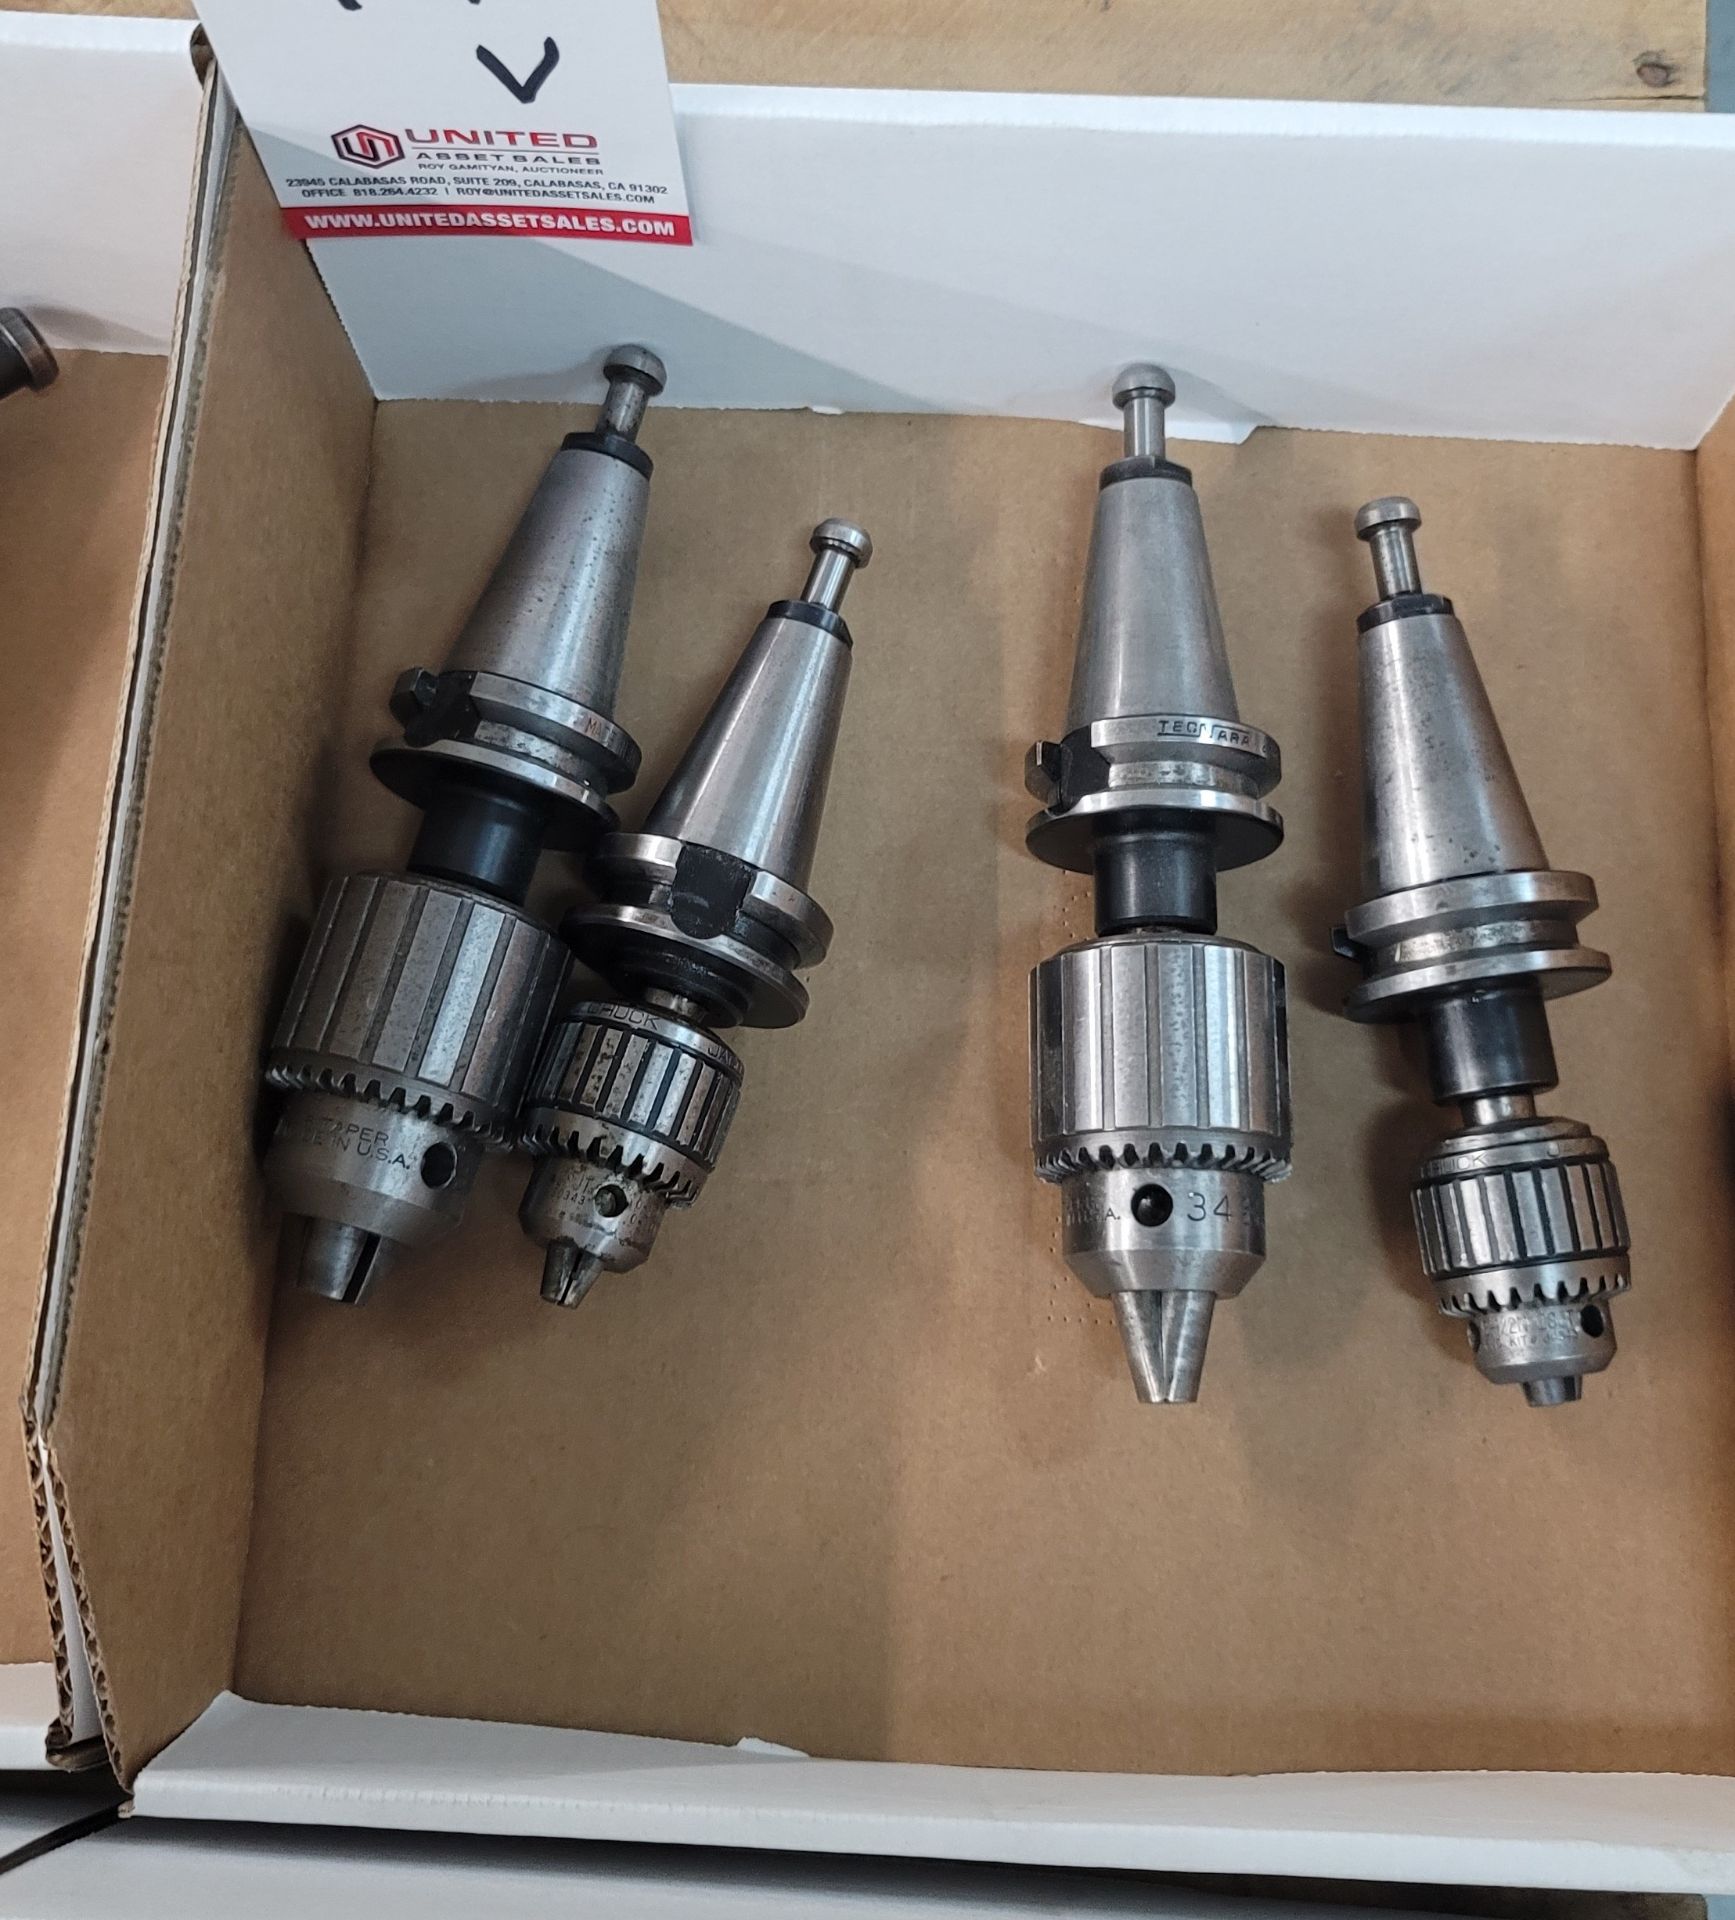 LOT - (4) BT-35 DRILL CHUCKS, **IMMEX REGISTERED EQUIPMENT (NEEDS TO RETURN TO THE US) SELLER WILL